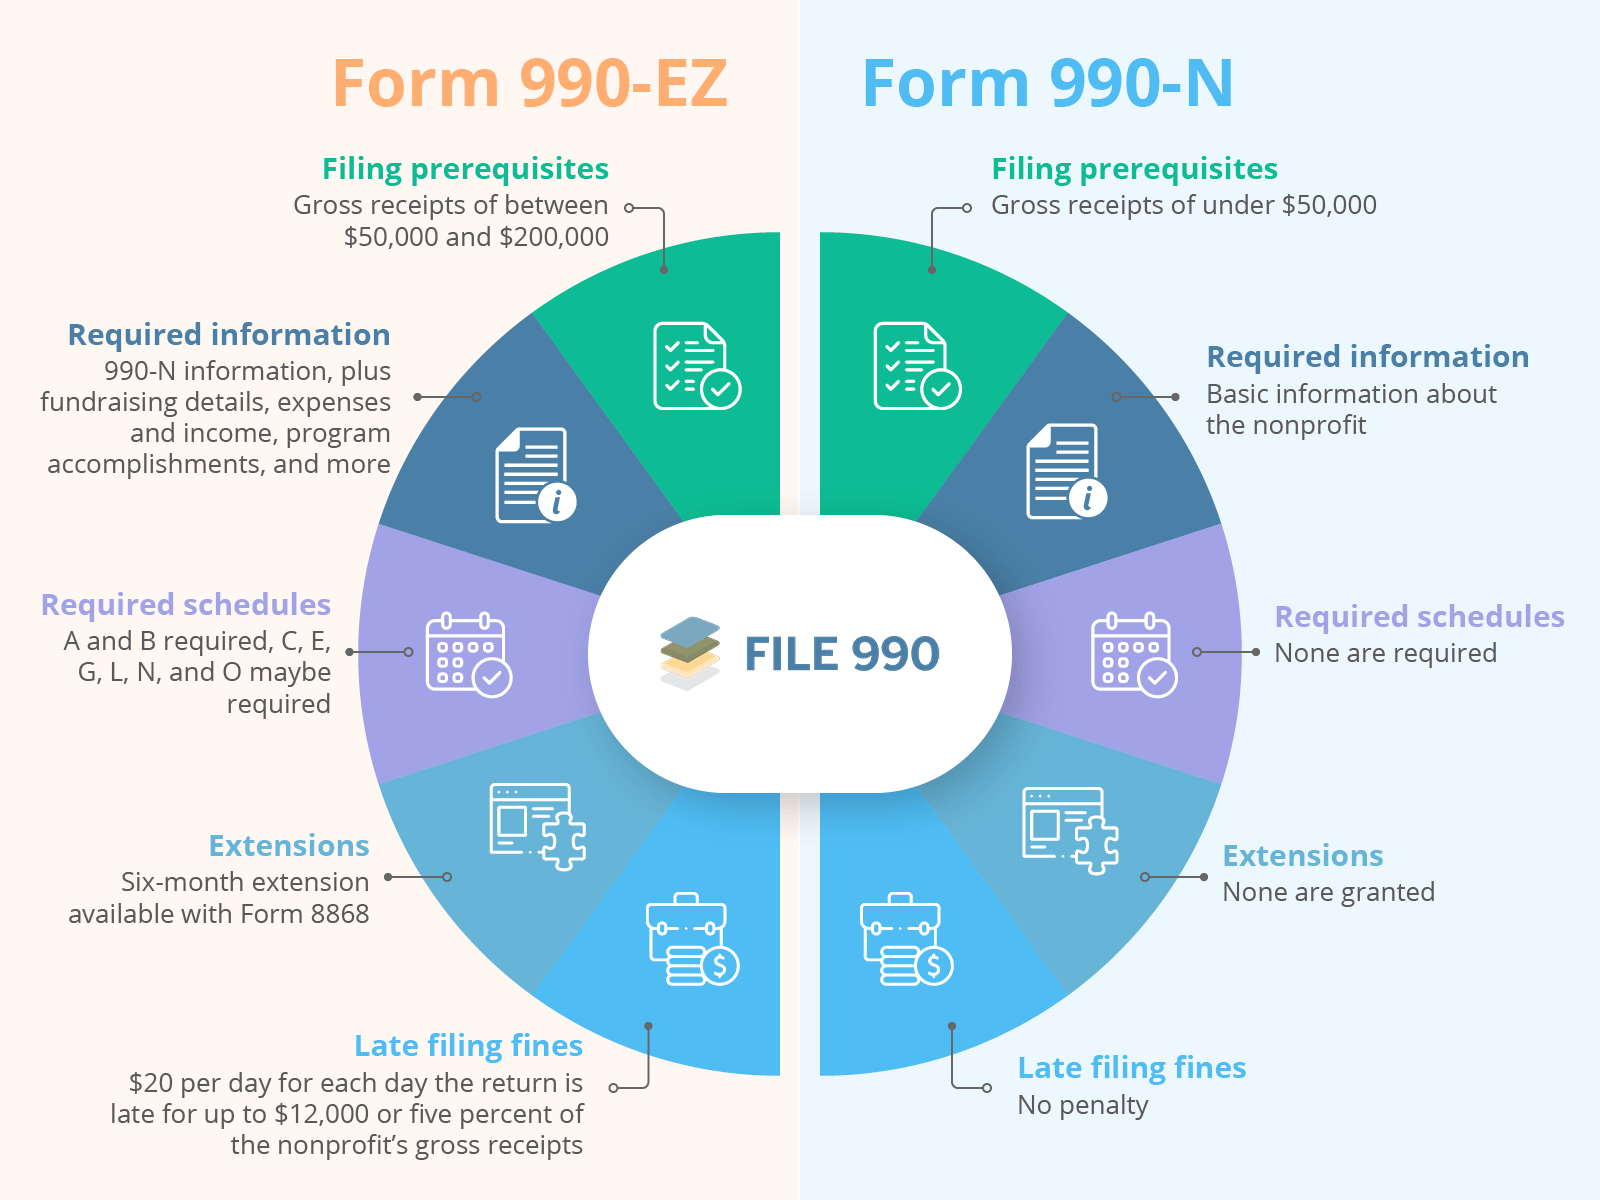 The differences between Forms 990-EZ vs 990-N (as explained below).